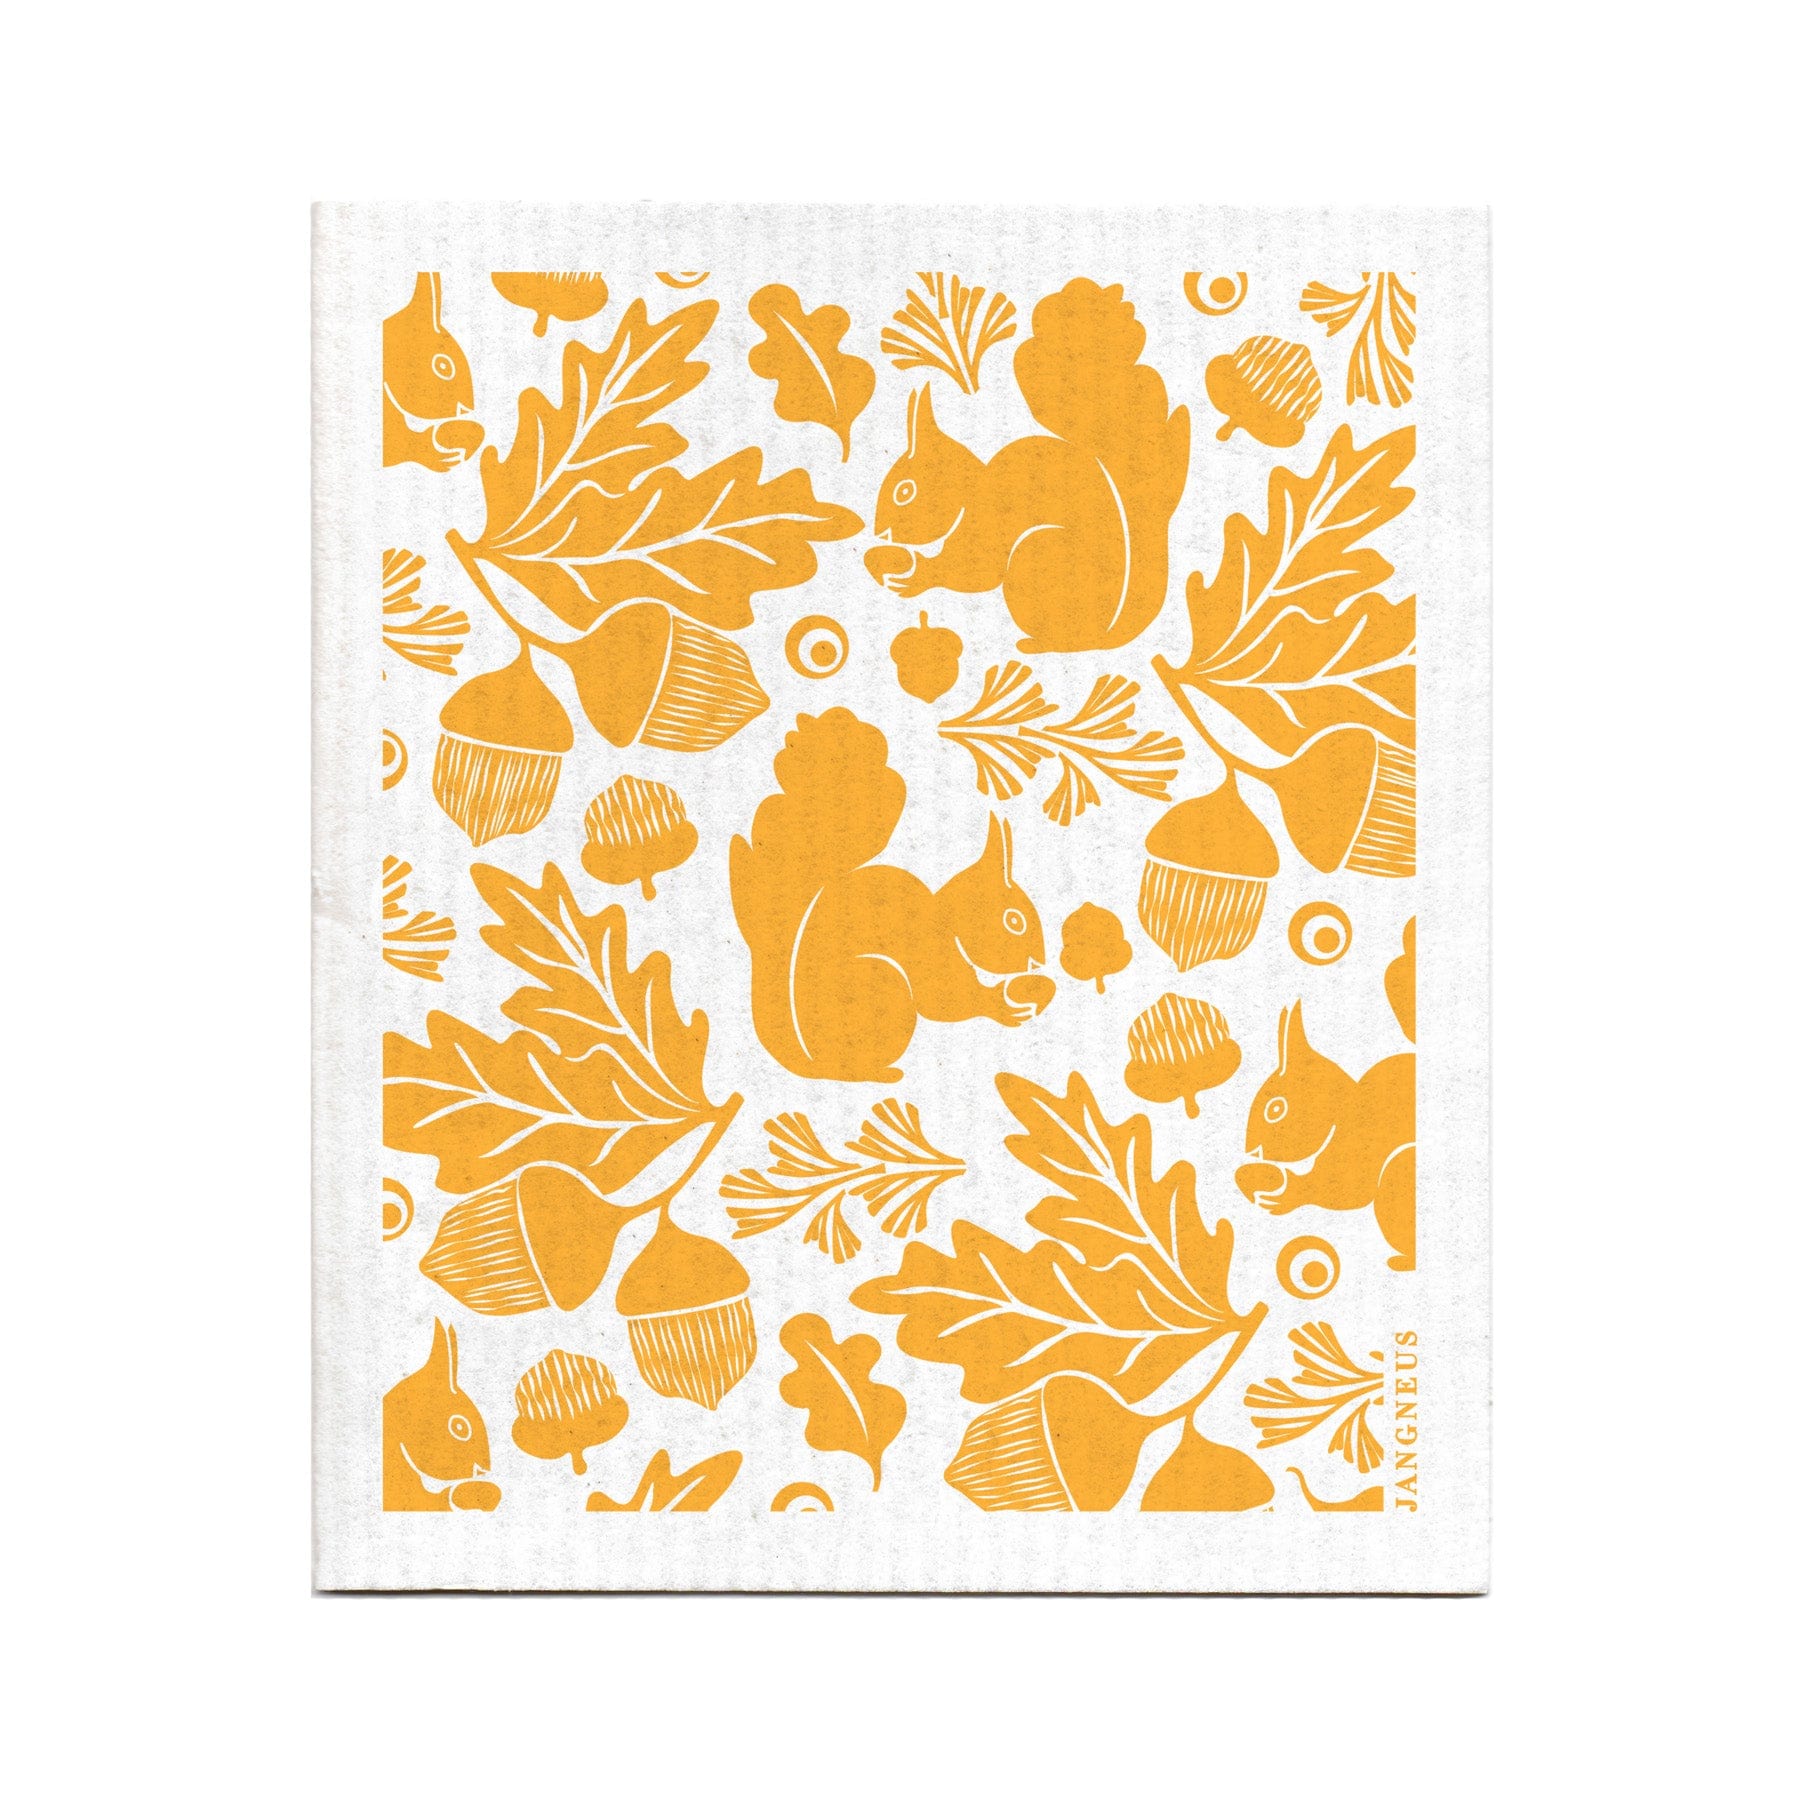 Autumn-themed illustration with squirrels, acorns, oak leaves, and foliage in orange print on a textured off-white background